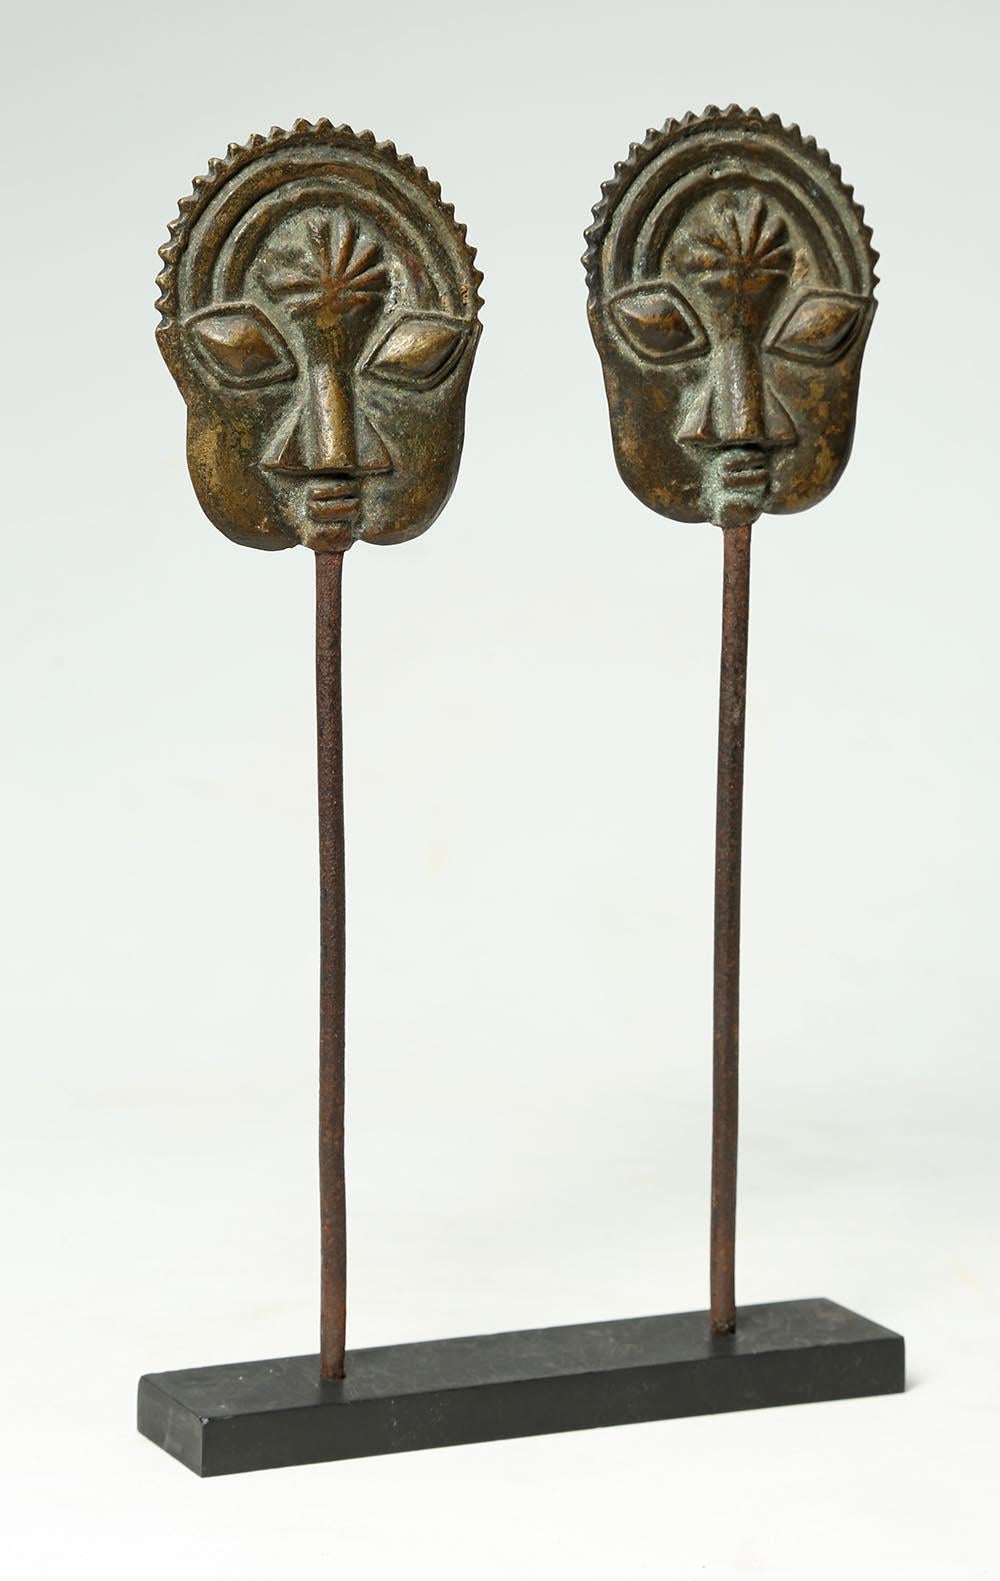 Nigerian Yoruba Tribal Ogboni Pair of Brass Pins with Faces, Nigeria Early 20th Century For Sale